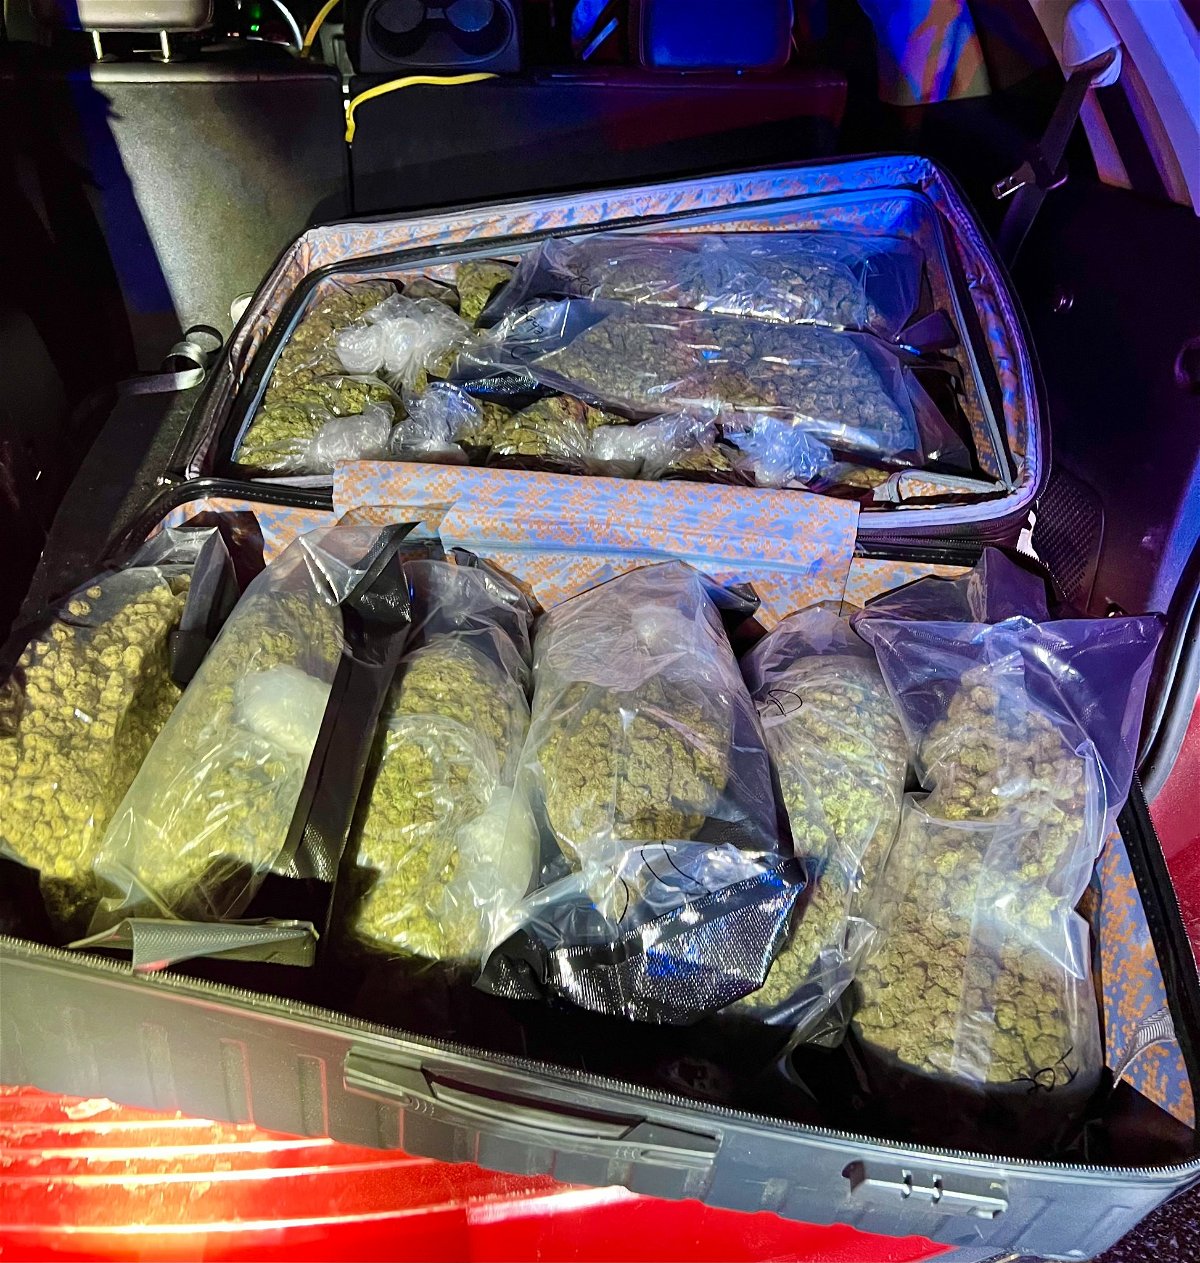 Deputies seized 15 pounds of packaged marijuana and 32 jars containing THC Wax during a June 28 traffic stop in Montgomery County.